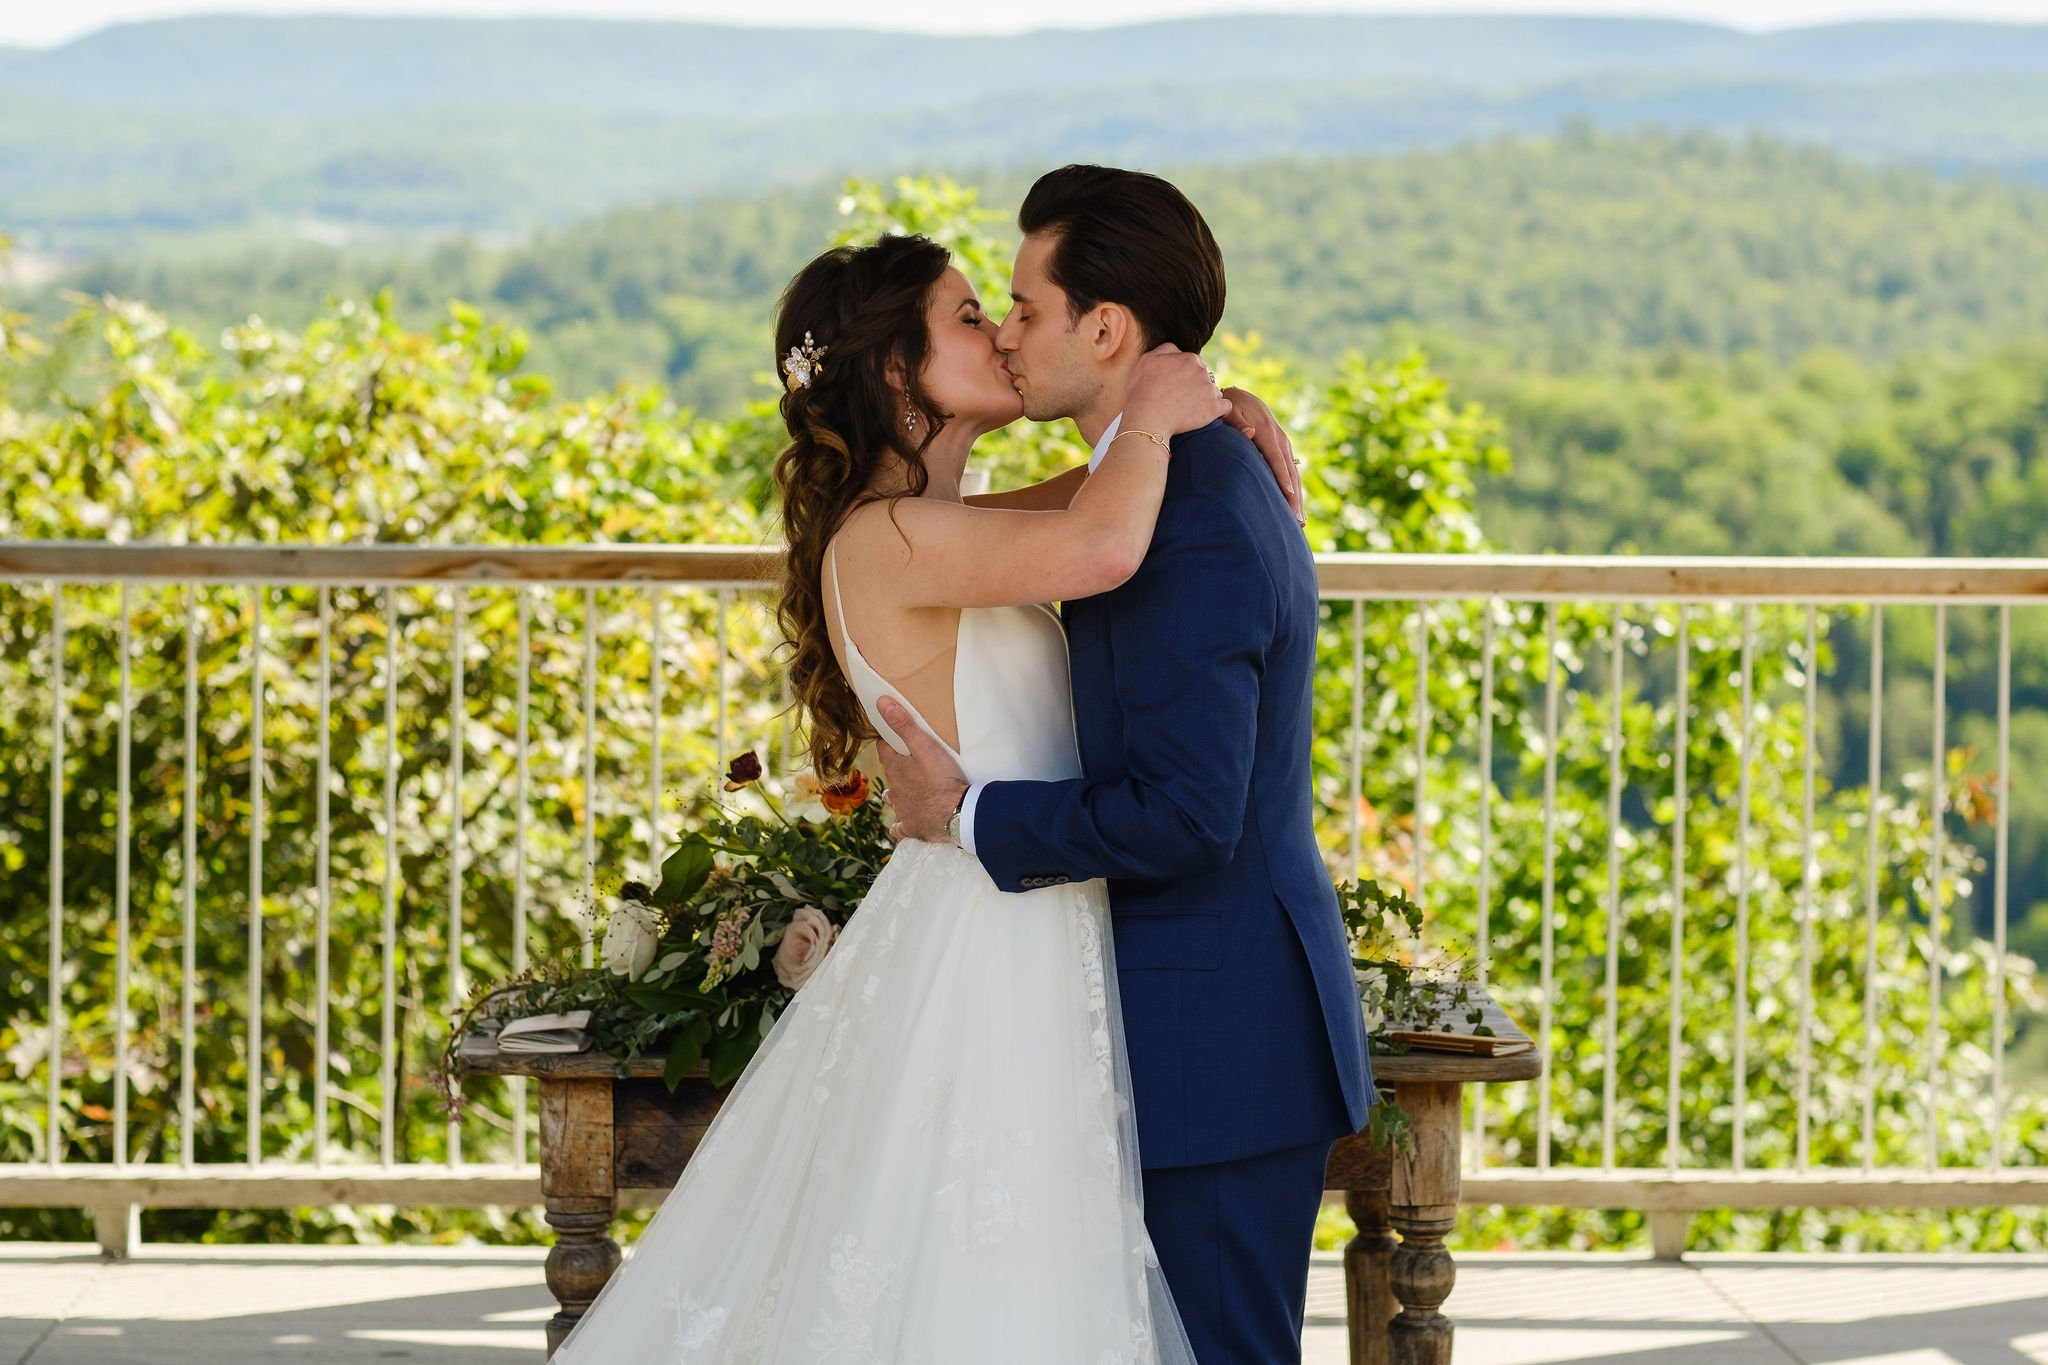  first kiss photo at le belvedere 